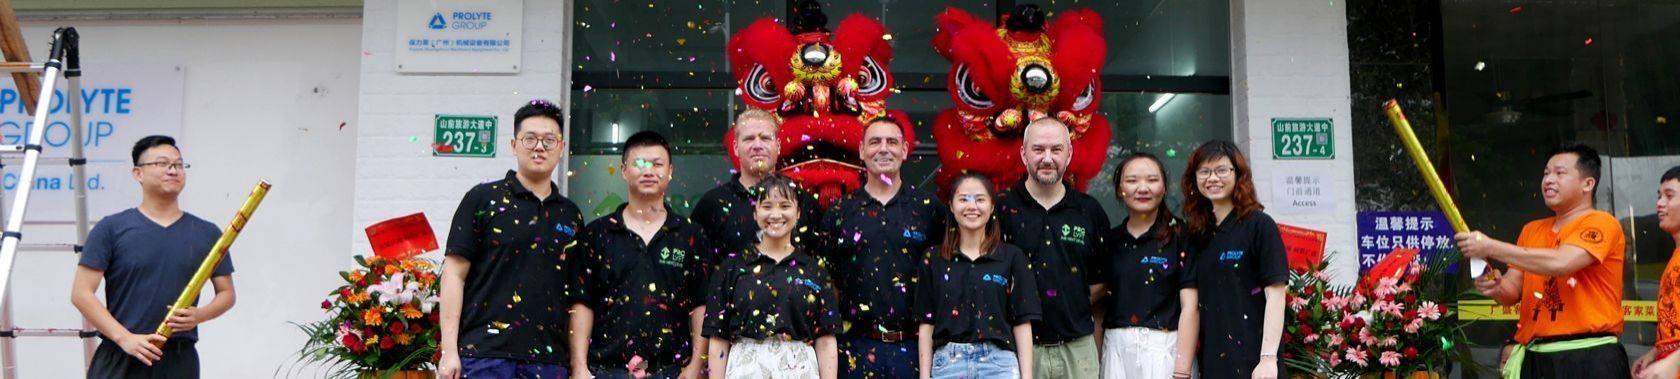 Prolyte Continues Global Expansion in China